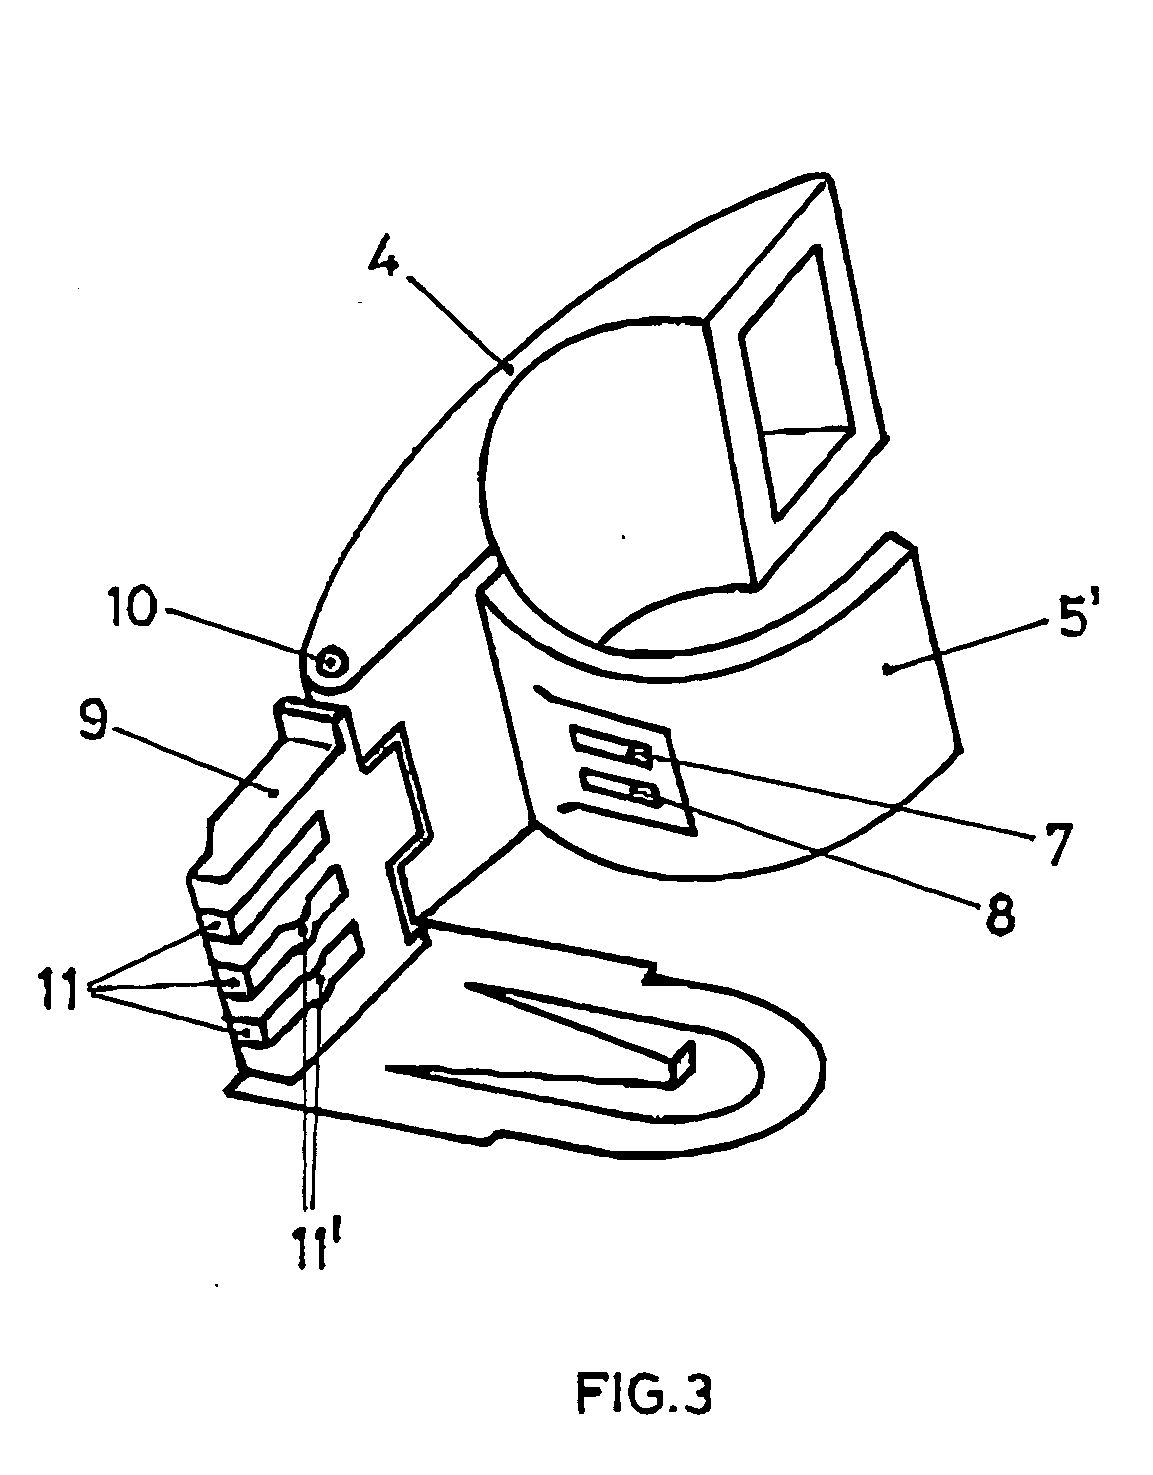 Housing for a hearing device